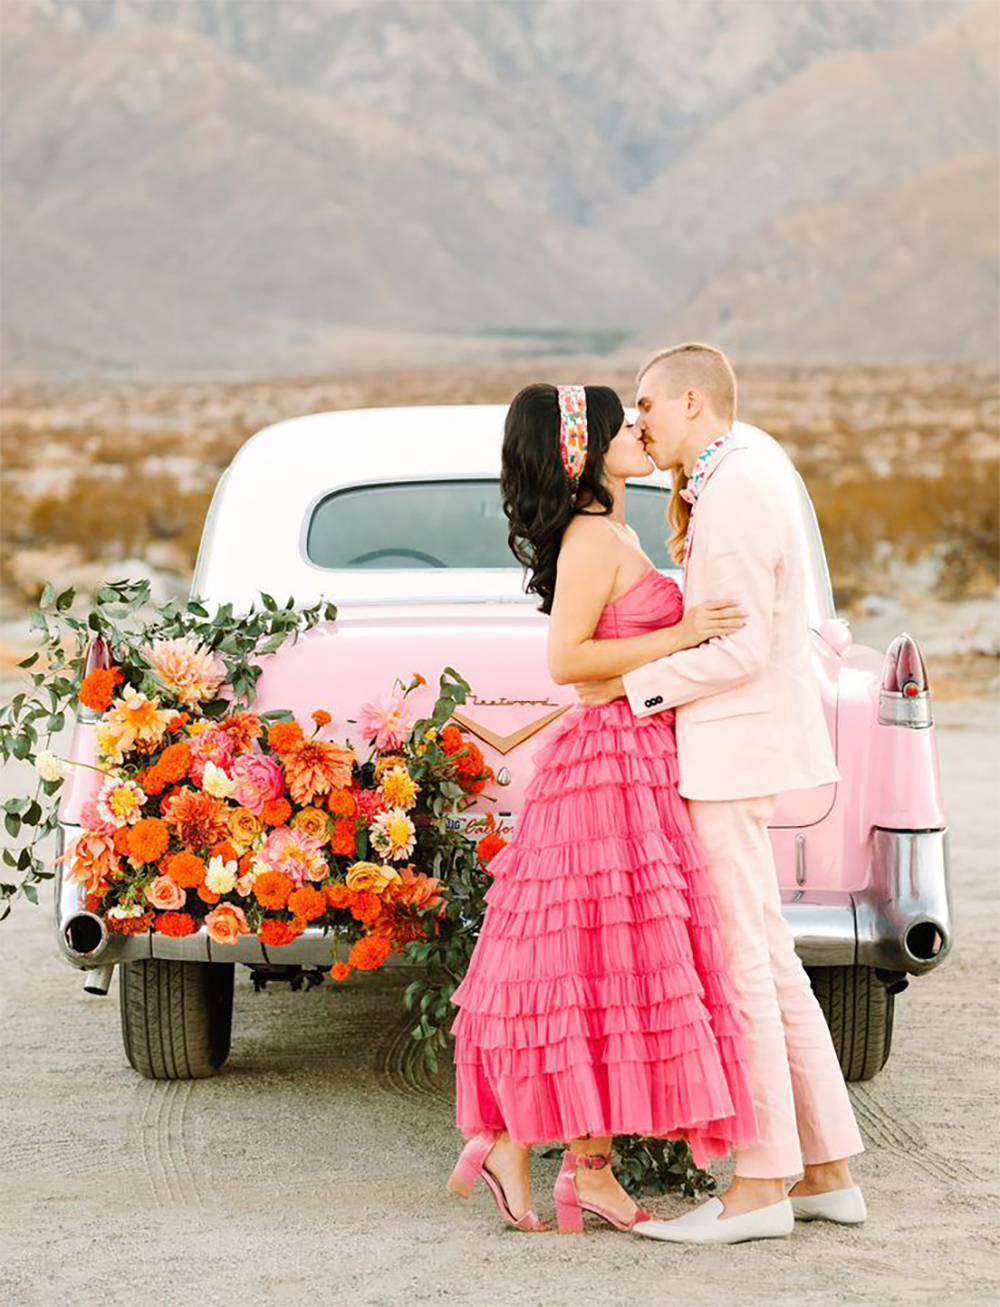 A bride and groom kissing in front of a pink classic car.